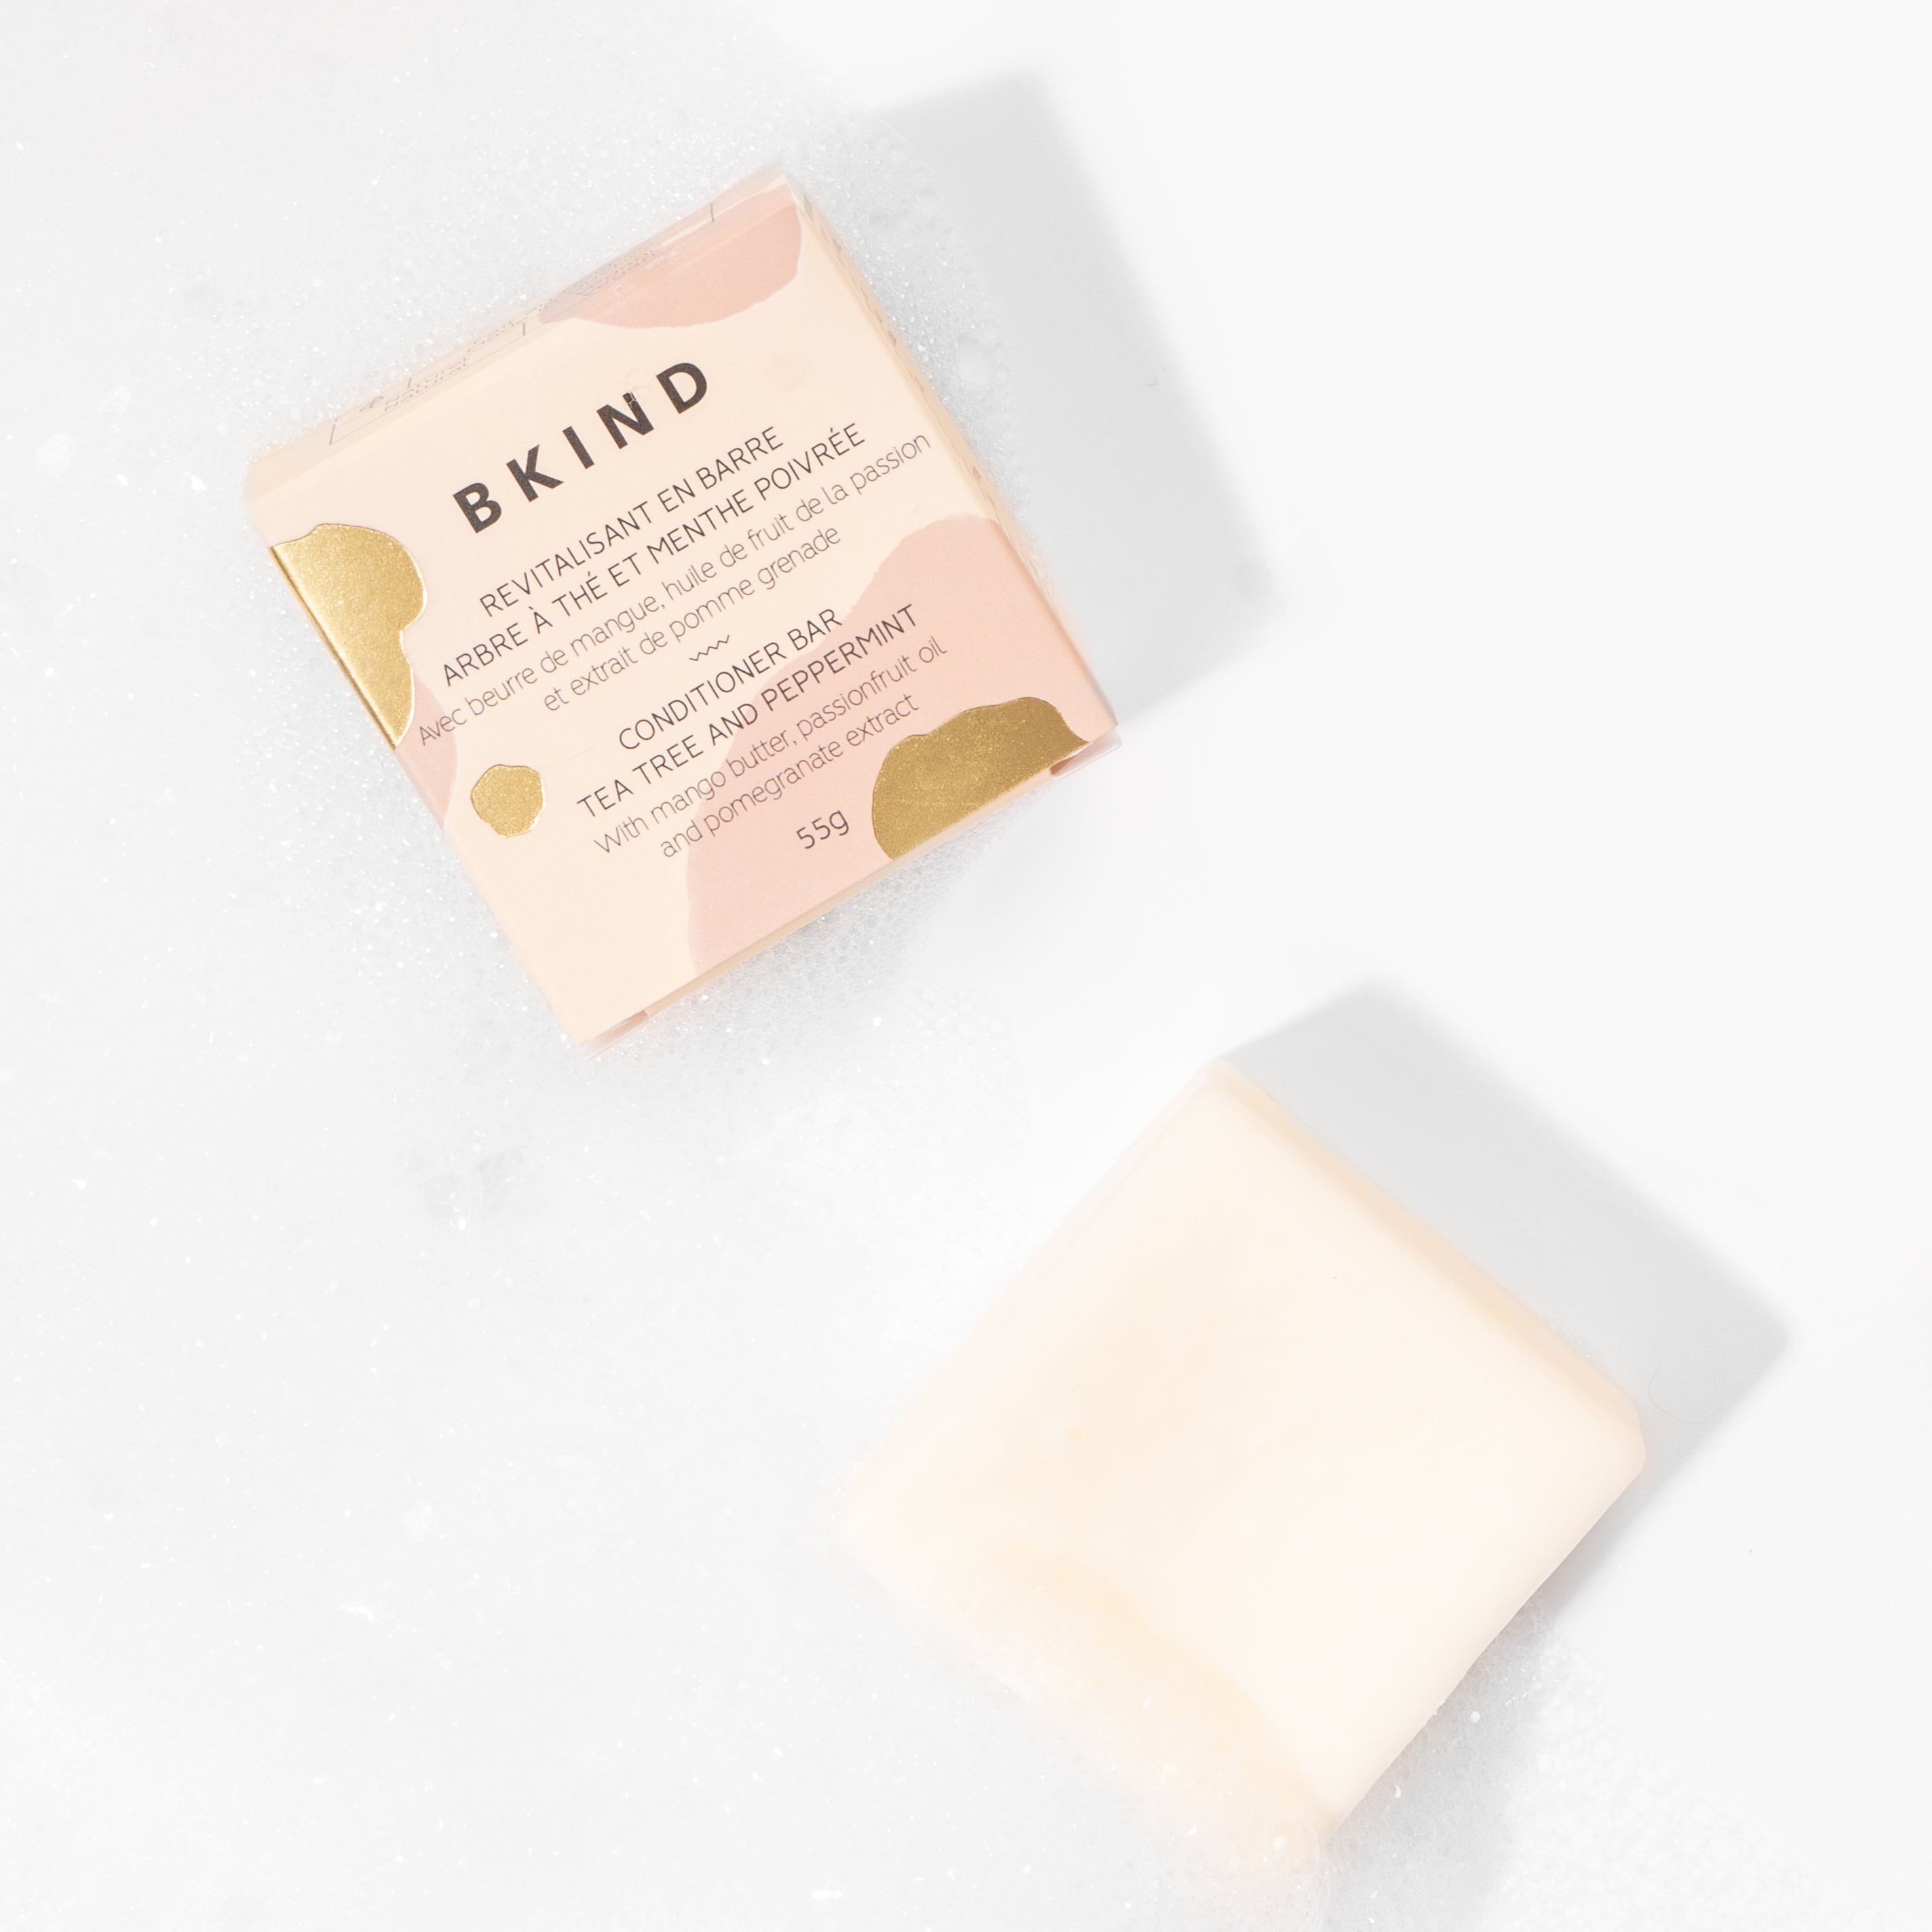 BKIND_conditioner_bar_tea_tree_peppermint_colord_white_hair